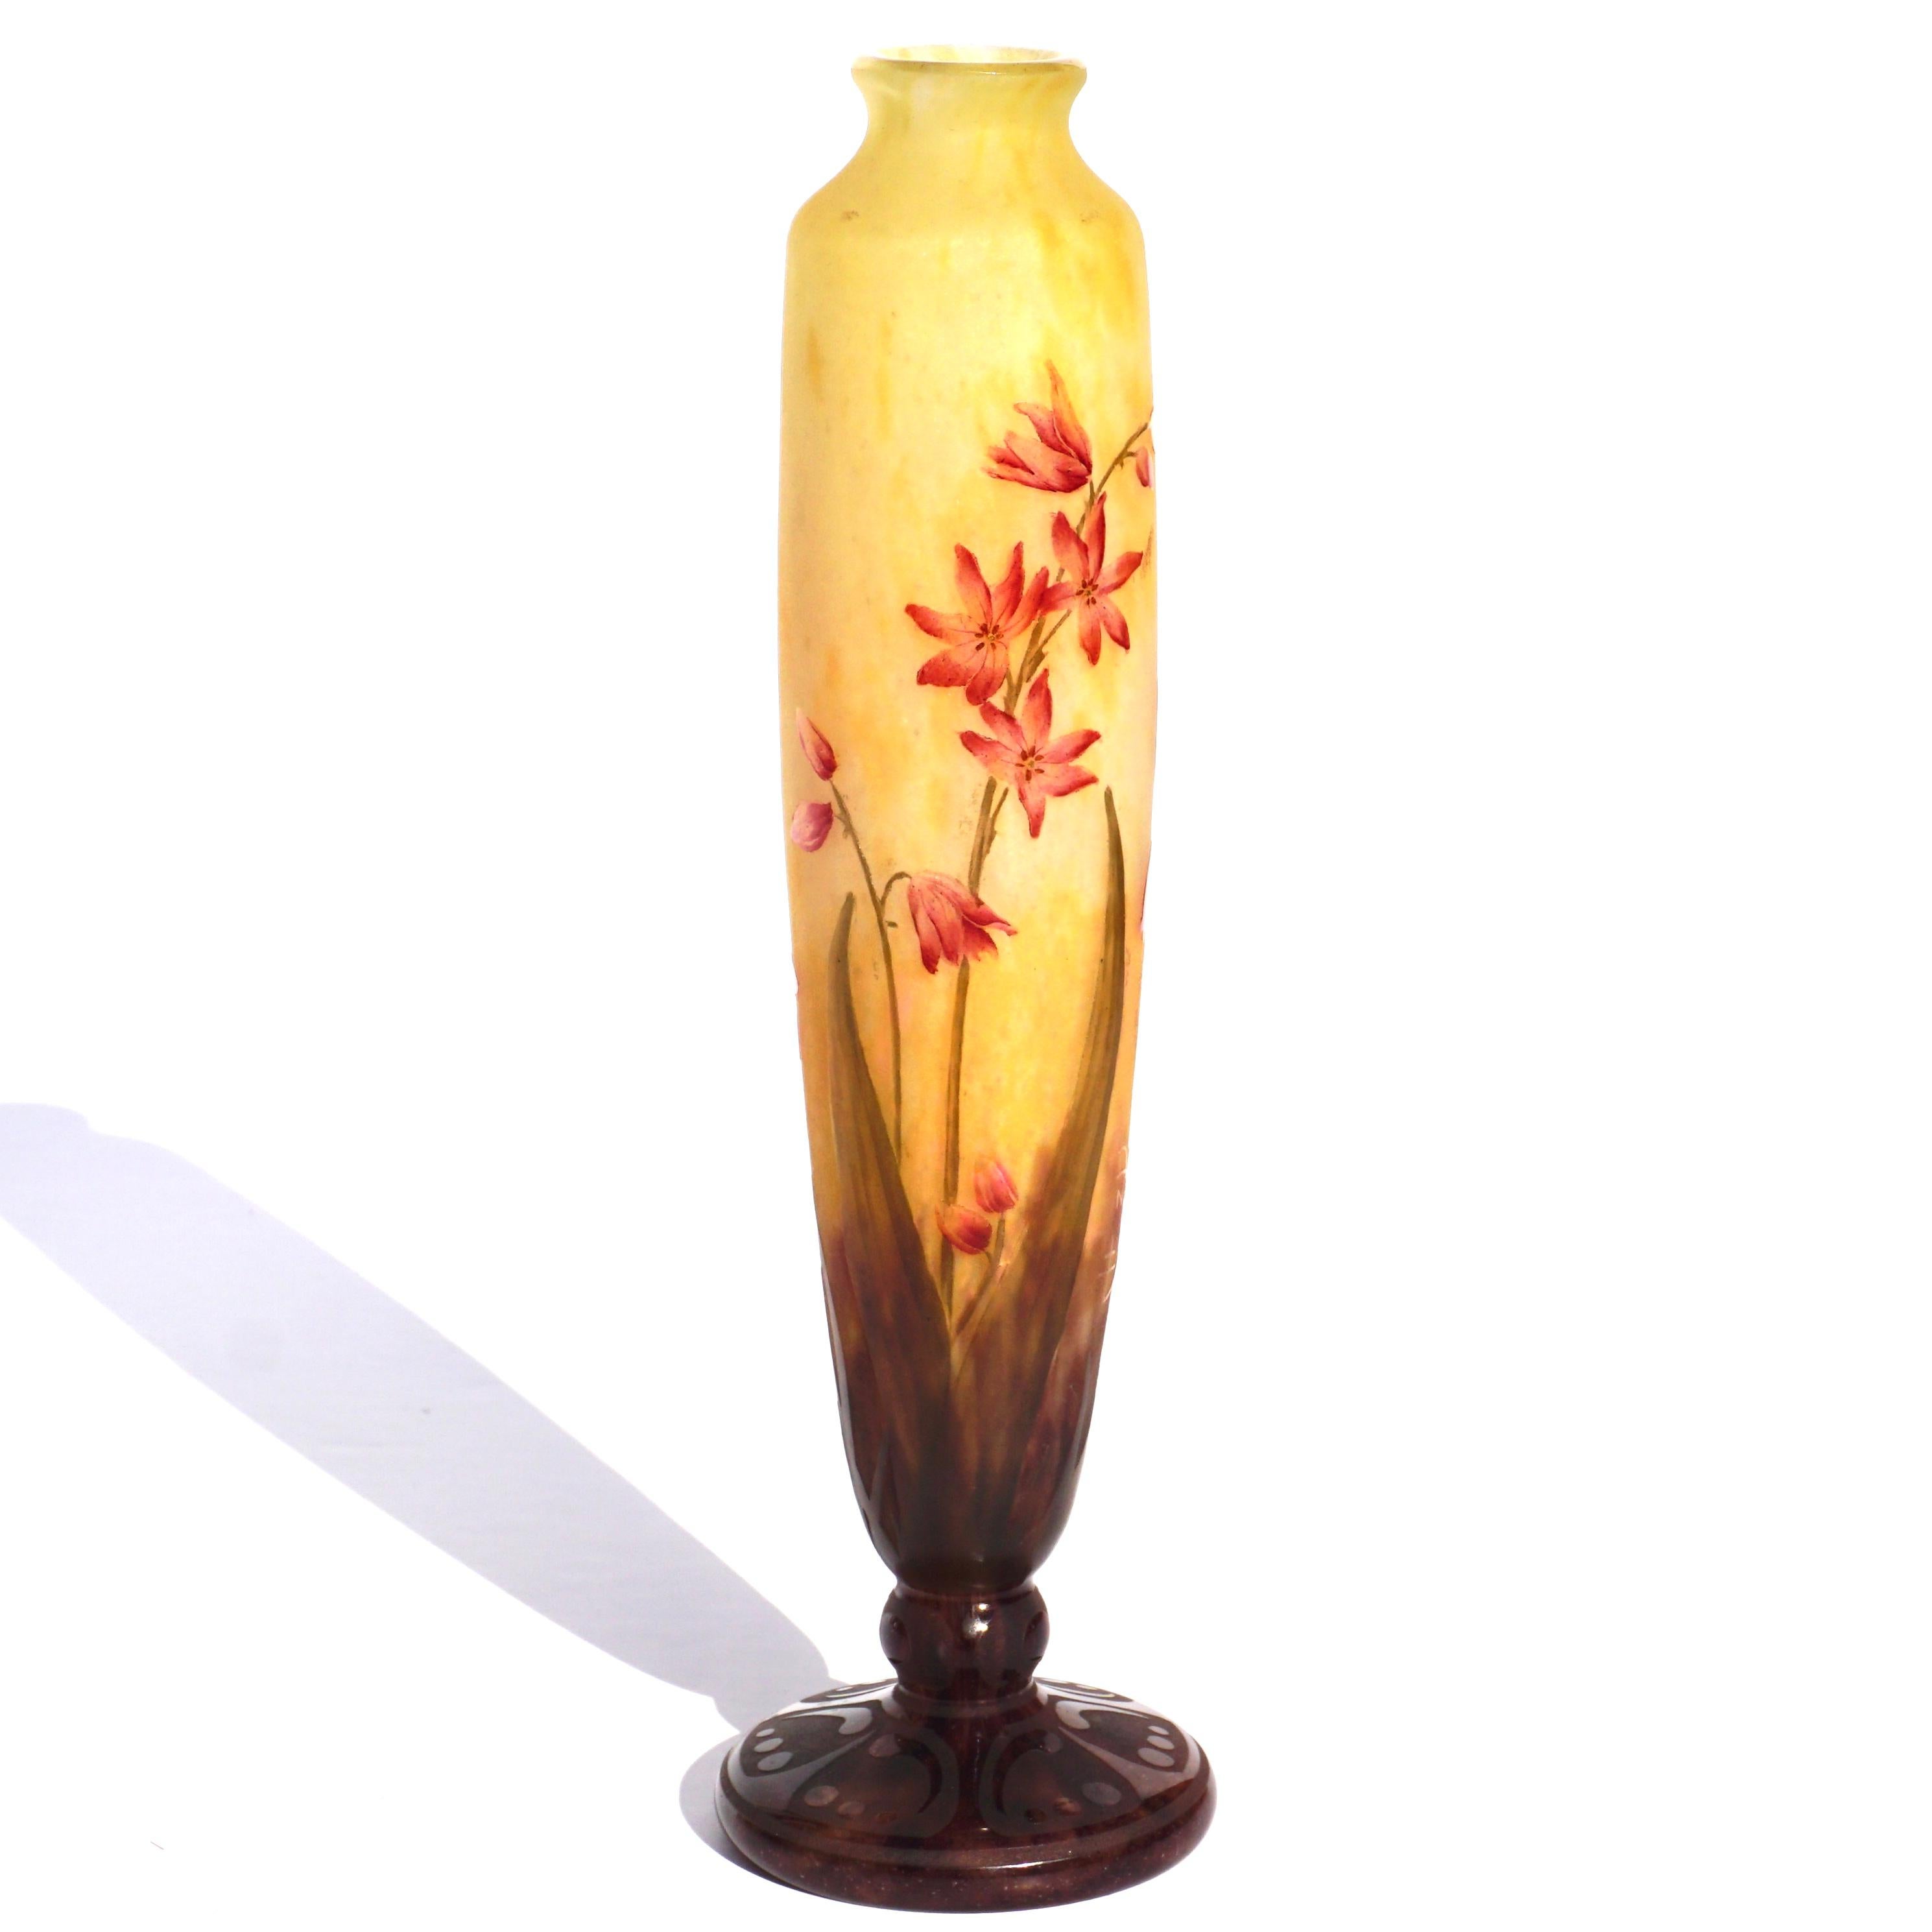 DAUM NANCY Cameo and Enameled Art Nouveau Glass vase
circa 1900
Enameled and acid etched with mottled glass.
Signed: 'Daum Nancy' with the Cross of Lorraine
Height: 9.3 Inches (23.5cm)

Condition: Very Good condition and appearance with no